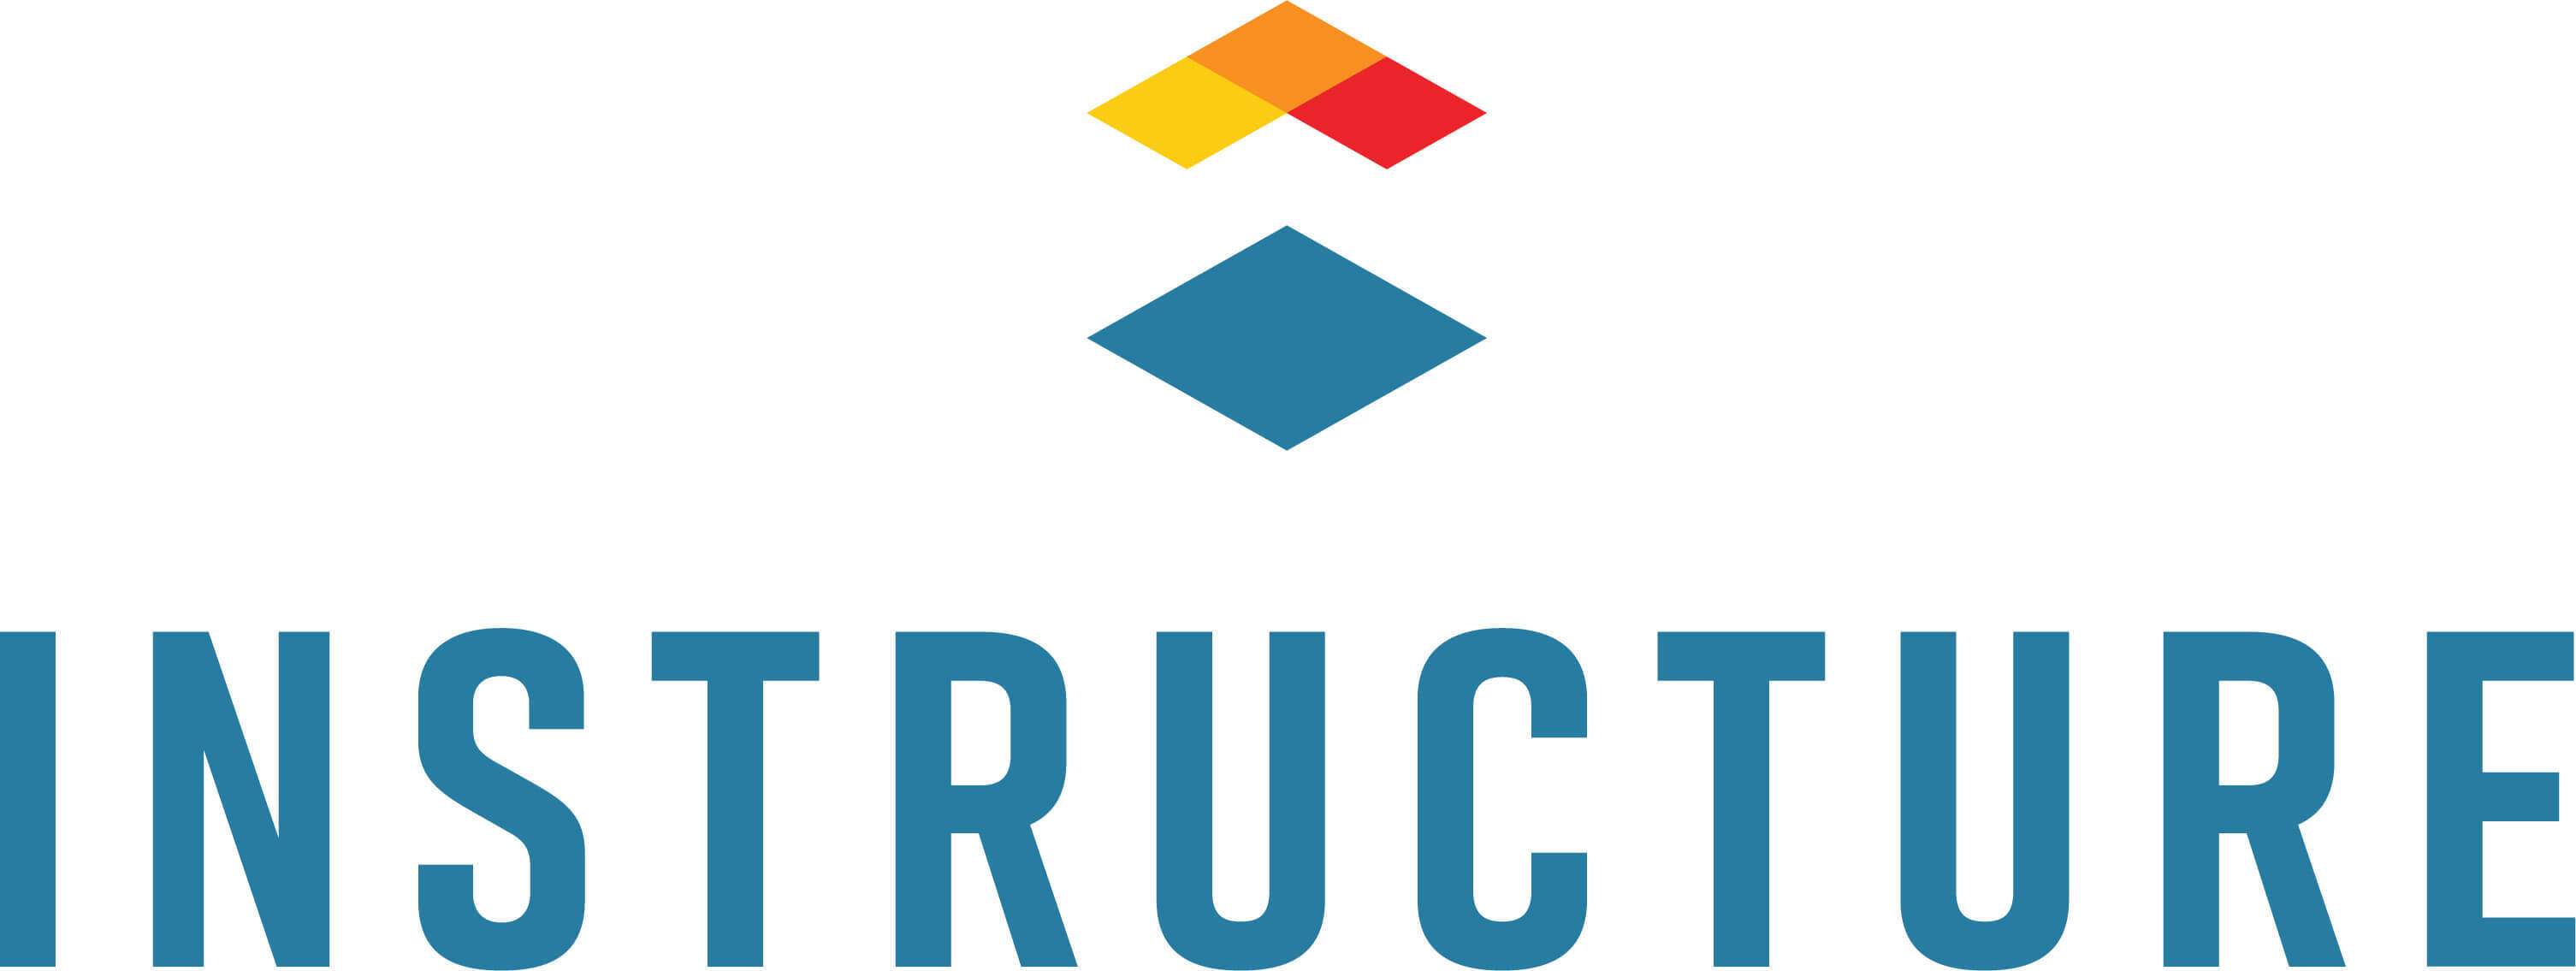 Instructure Logo Vertical Color